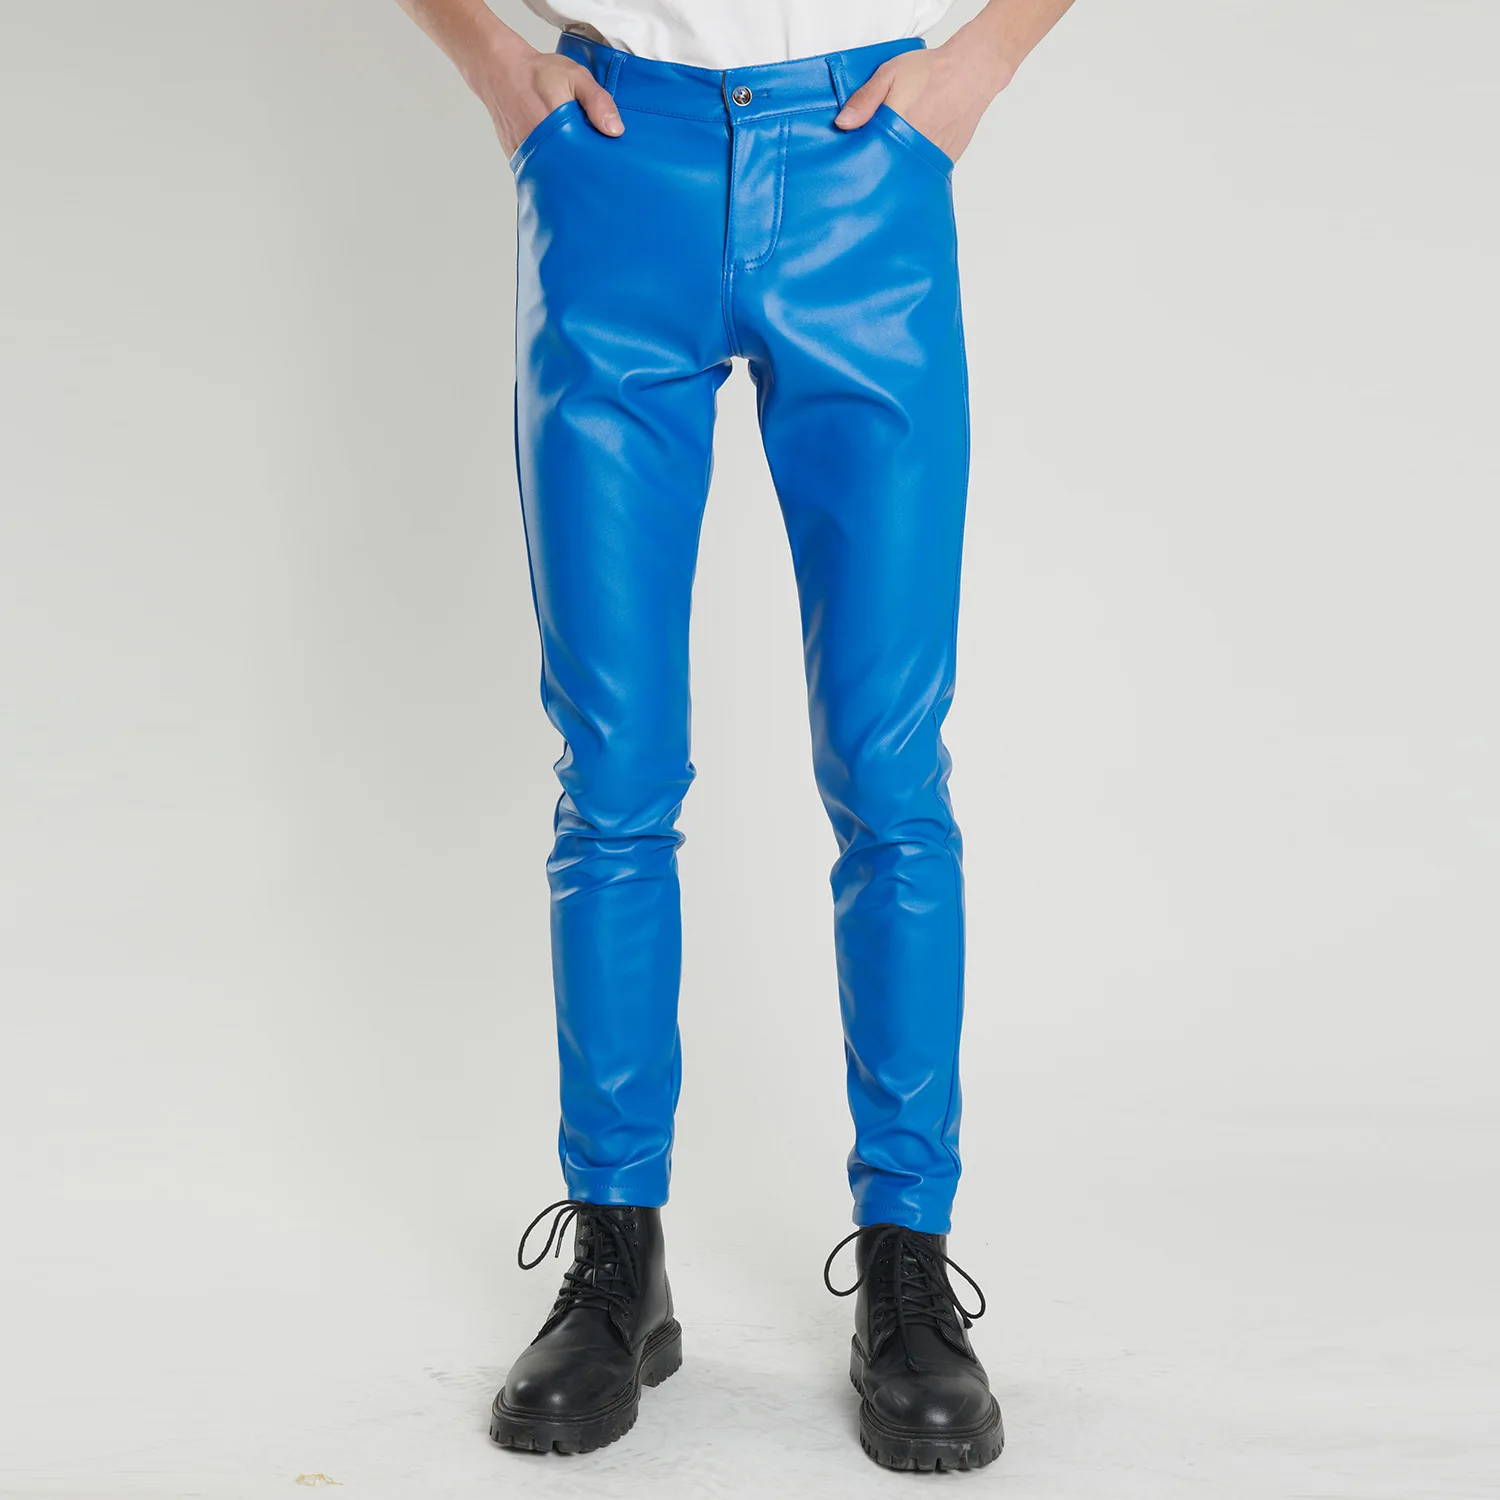 2023 Men's Stretch Slim Pu Leather Pants Youth Fashion Motorcycle Leisure Leather Pants 3